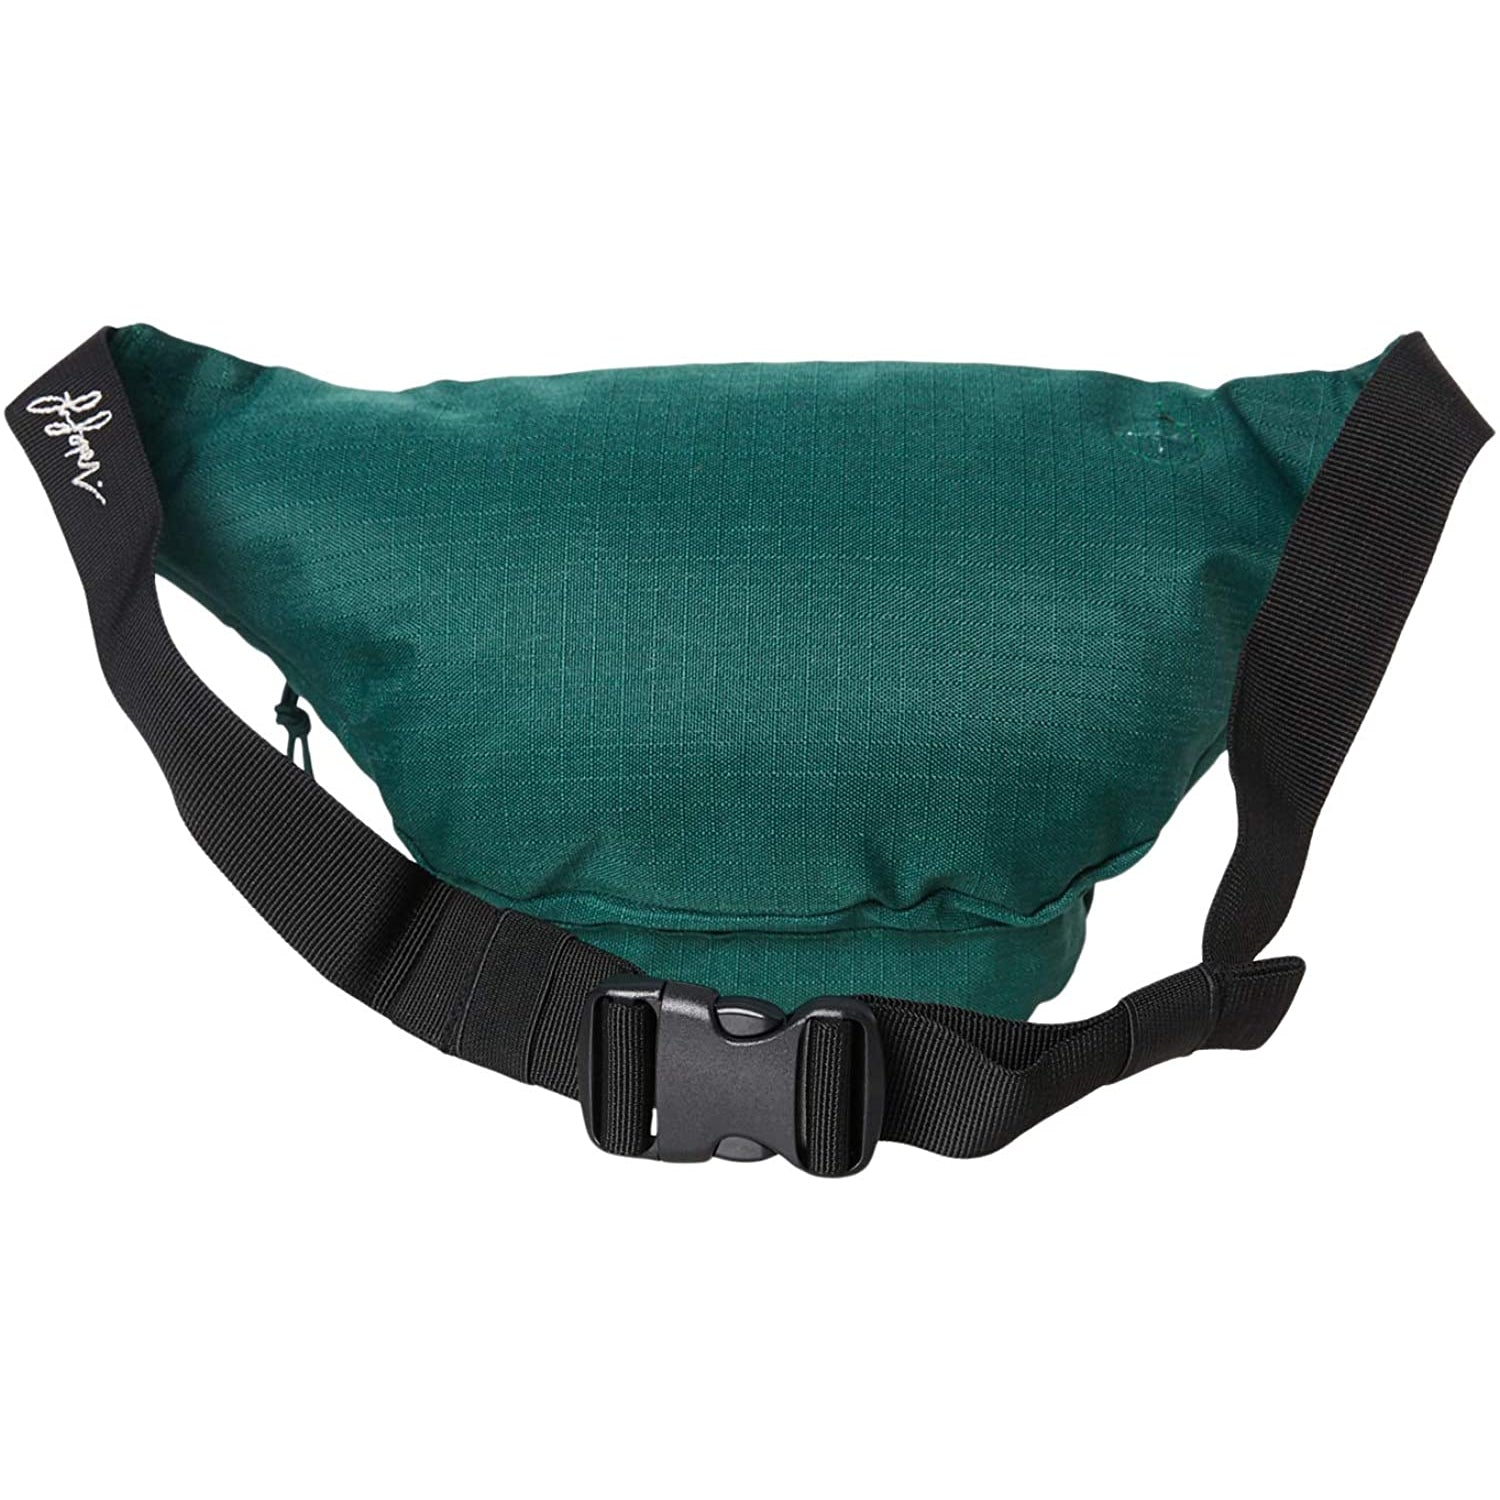 Louie Lopez Navy and Forest Green Hybrid Bumbag Hip Pack